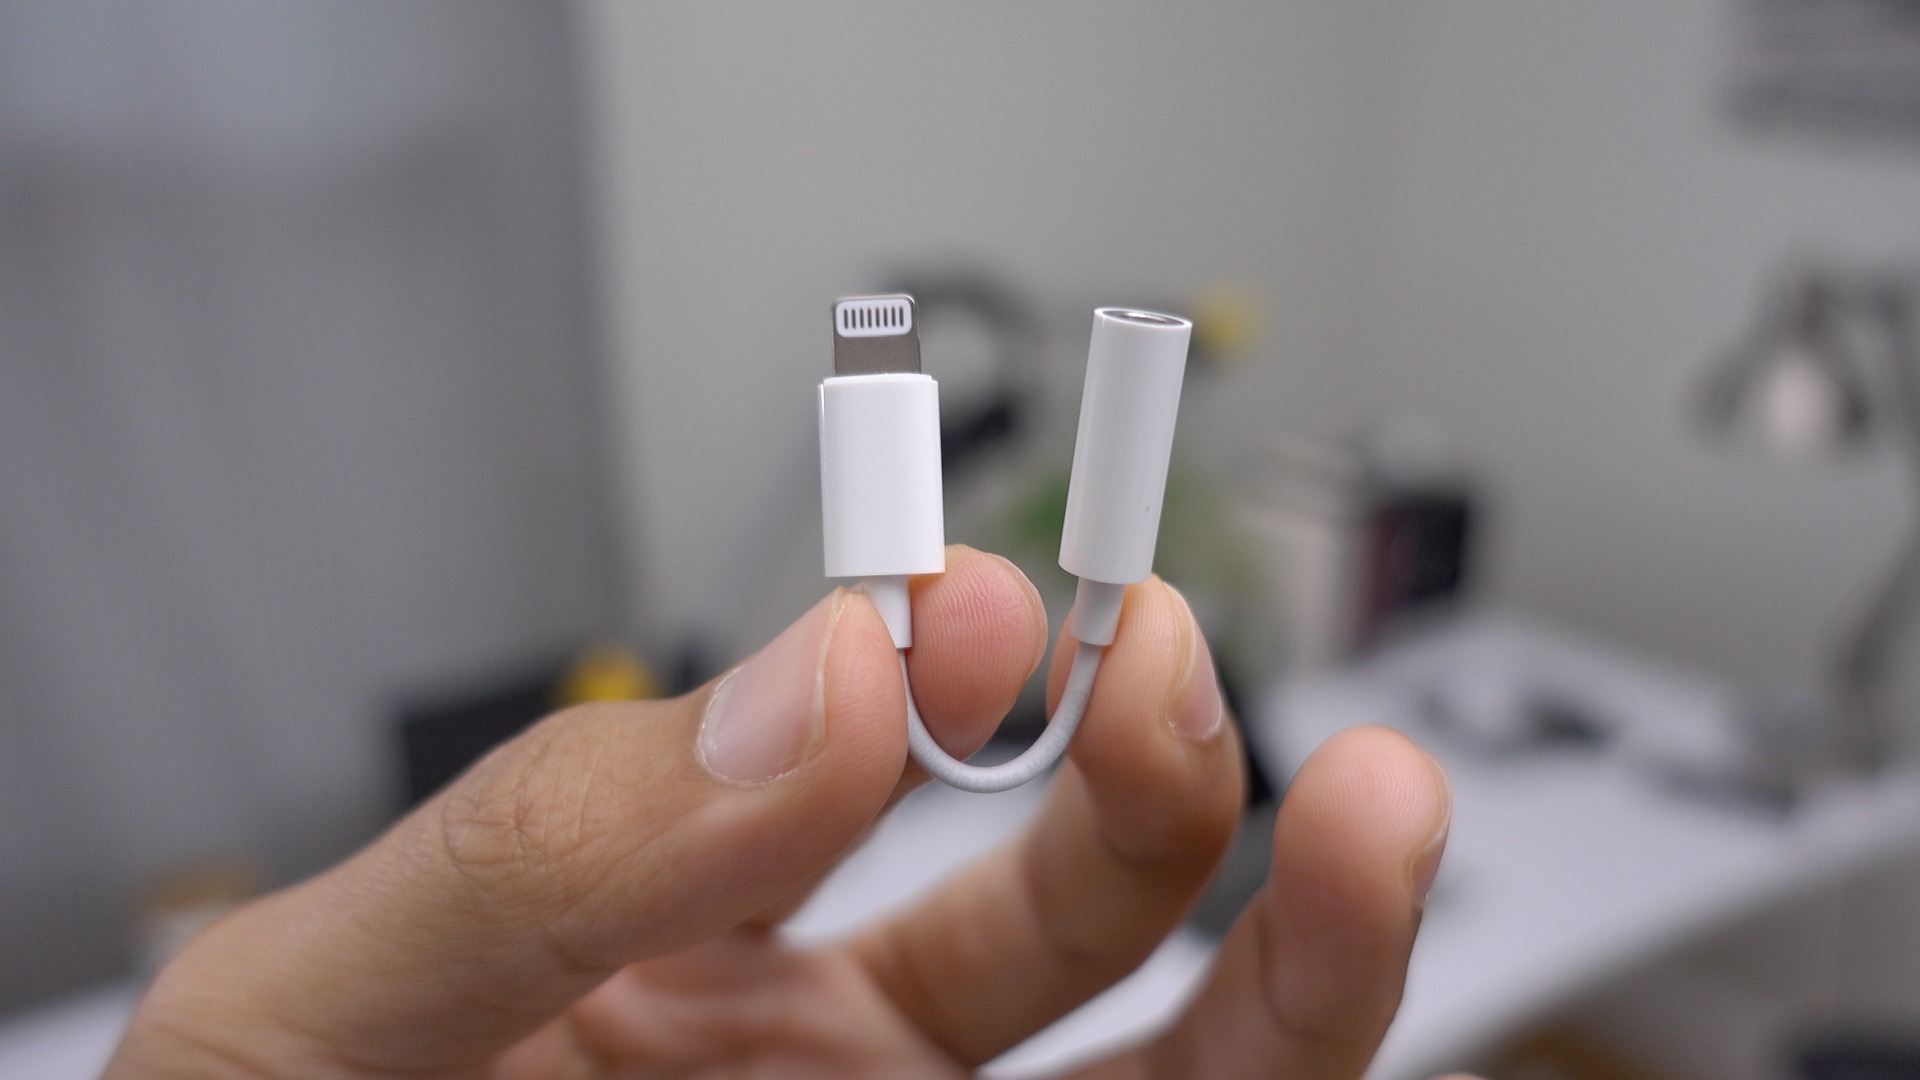 where can i buy a dongle for iphone